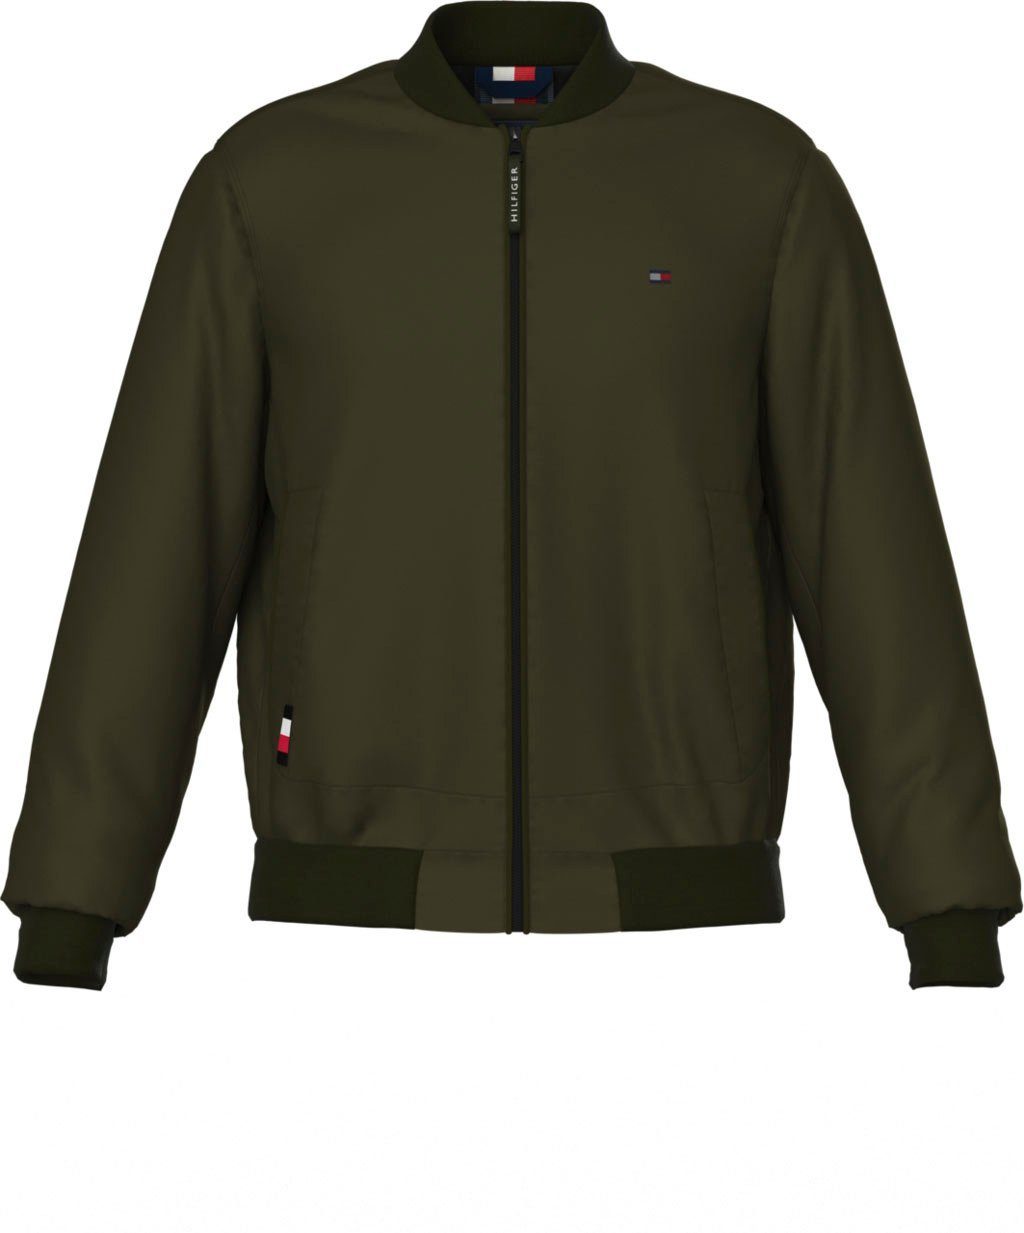 Tommy Hilfiger Bomberjacke »BASE LAYER PACKABLE BOMBER« online kaufen | OTTO